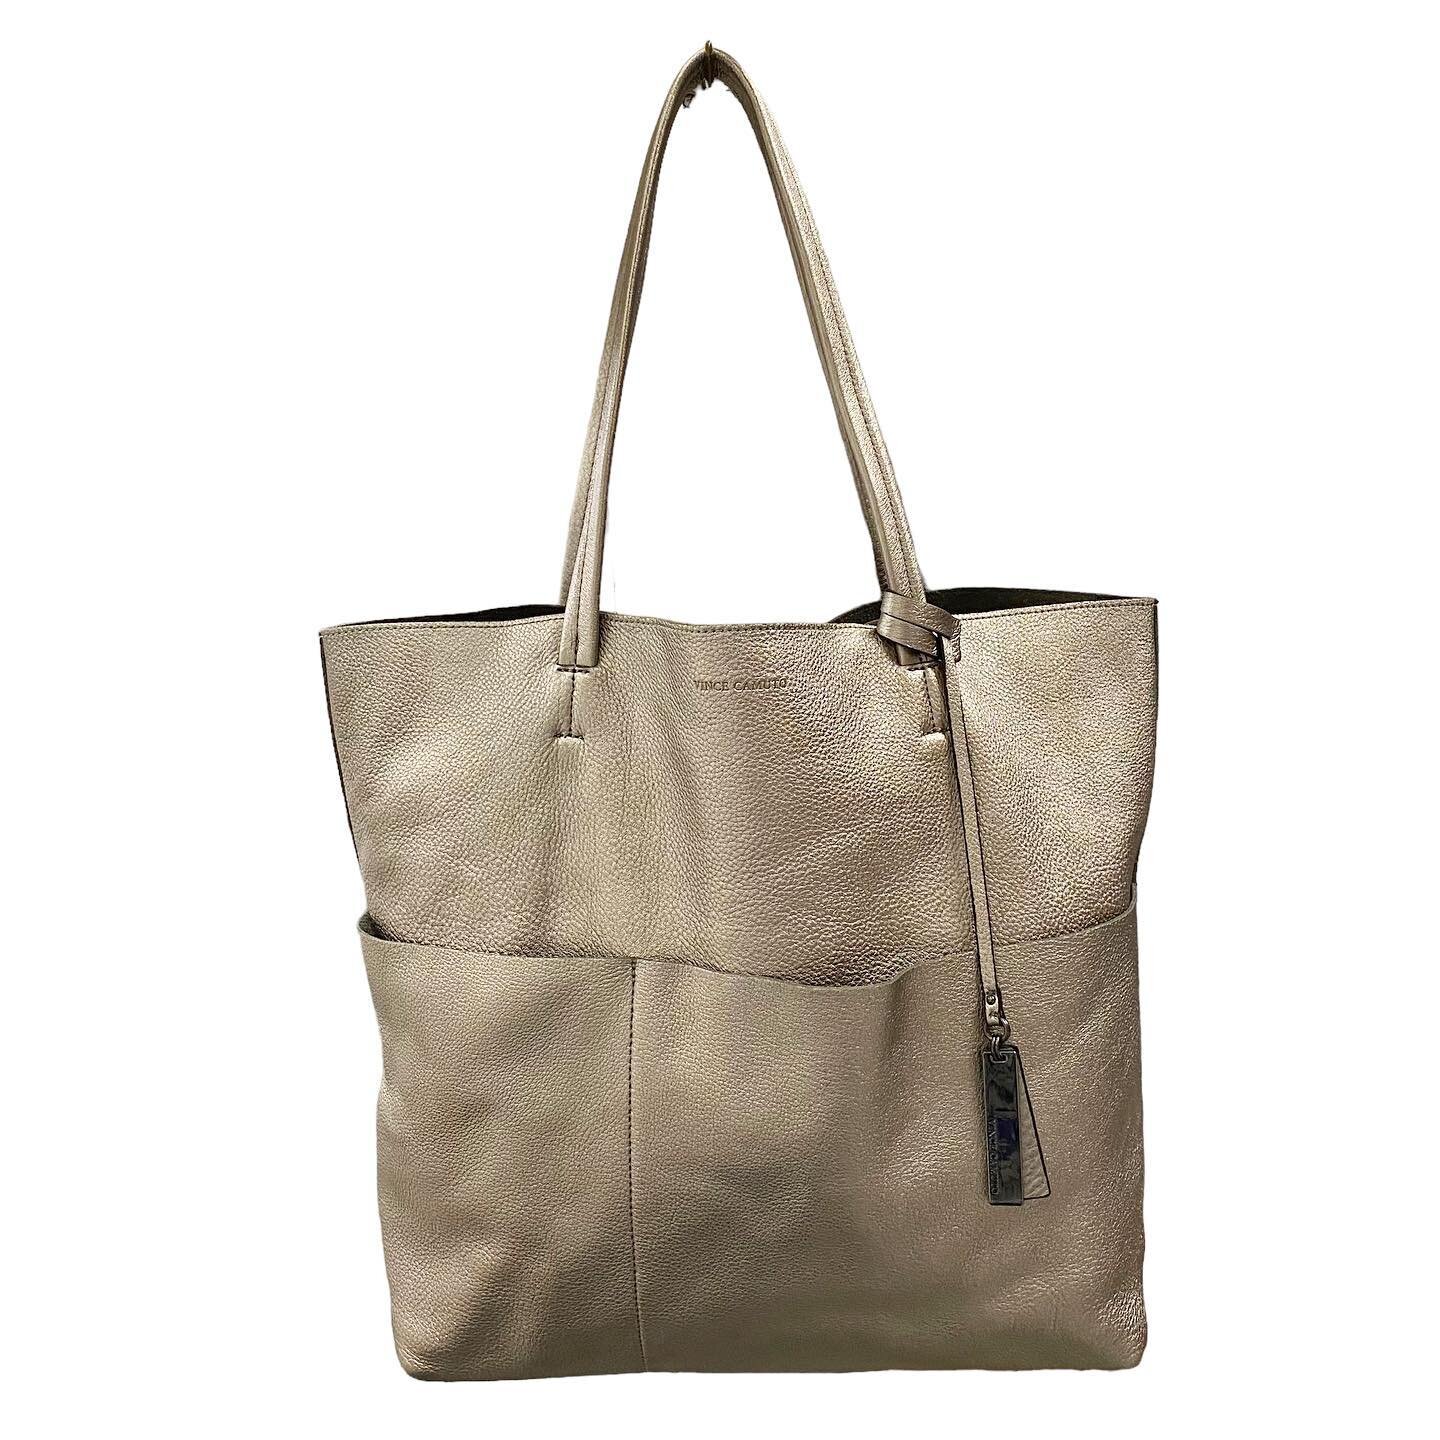 Vince Camuto Tote $88.95